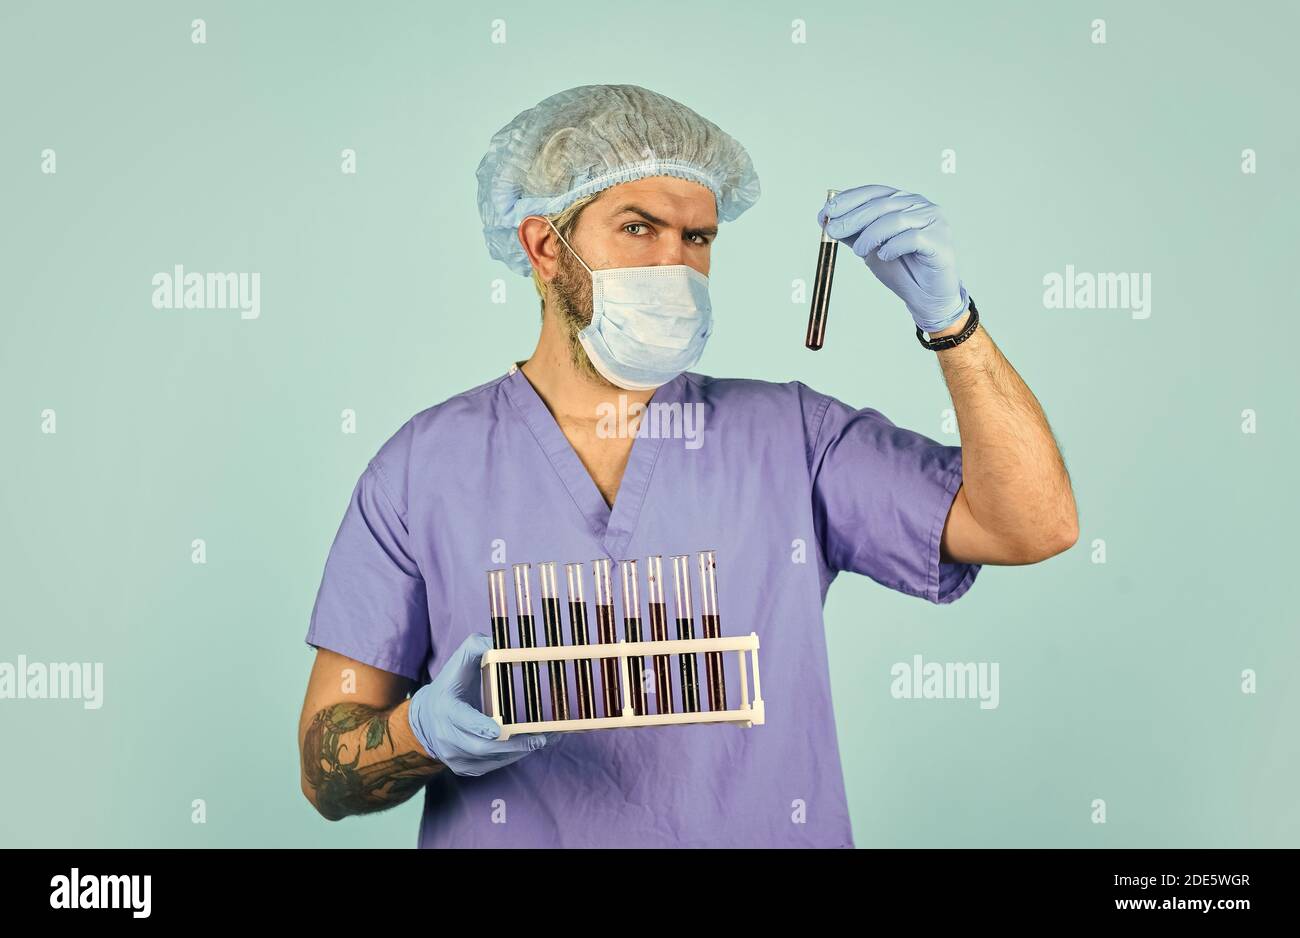 Epidemic disease. Virus concept. Epidemic infection. Genetic analysis. Critical number or density of susceptible hosts. Epidemic threshold. Man in medical lab inspecting samples biological material. Stock Photo